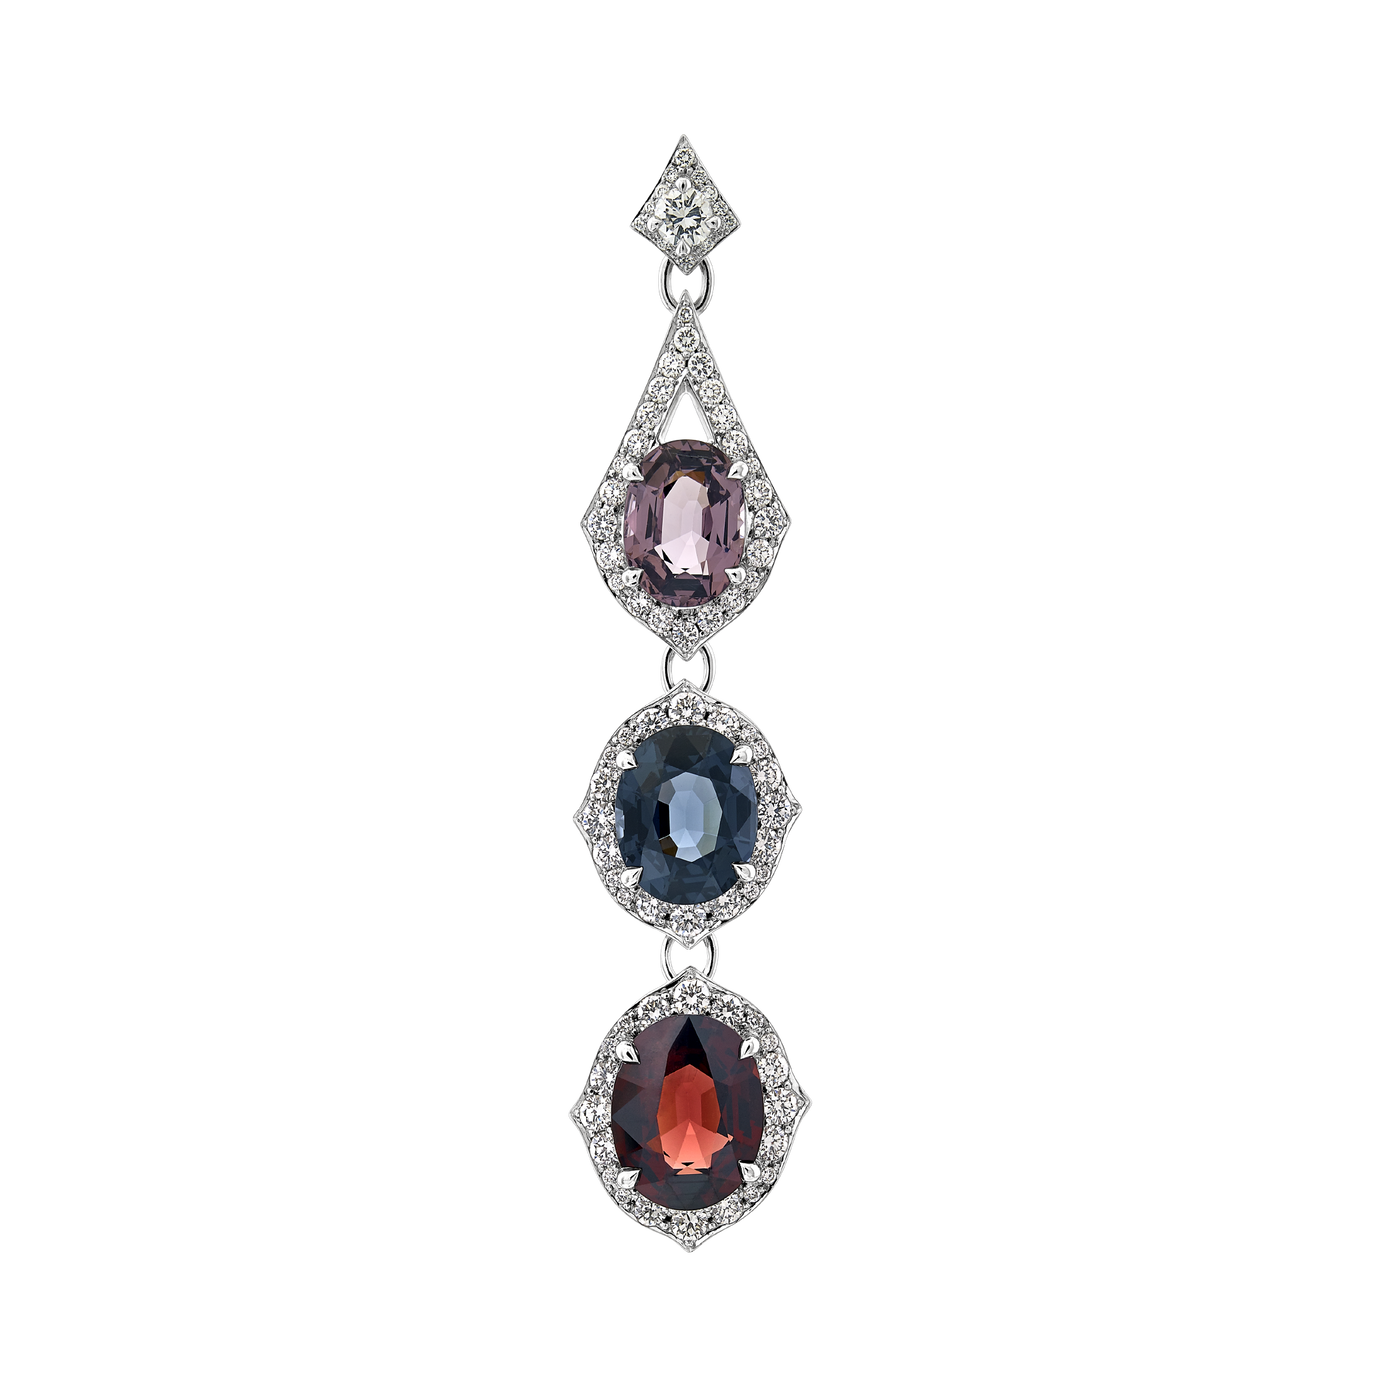 3 Colored Spinel Pendant with White Diamond